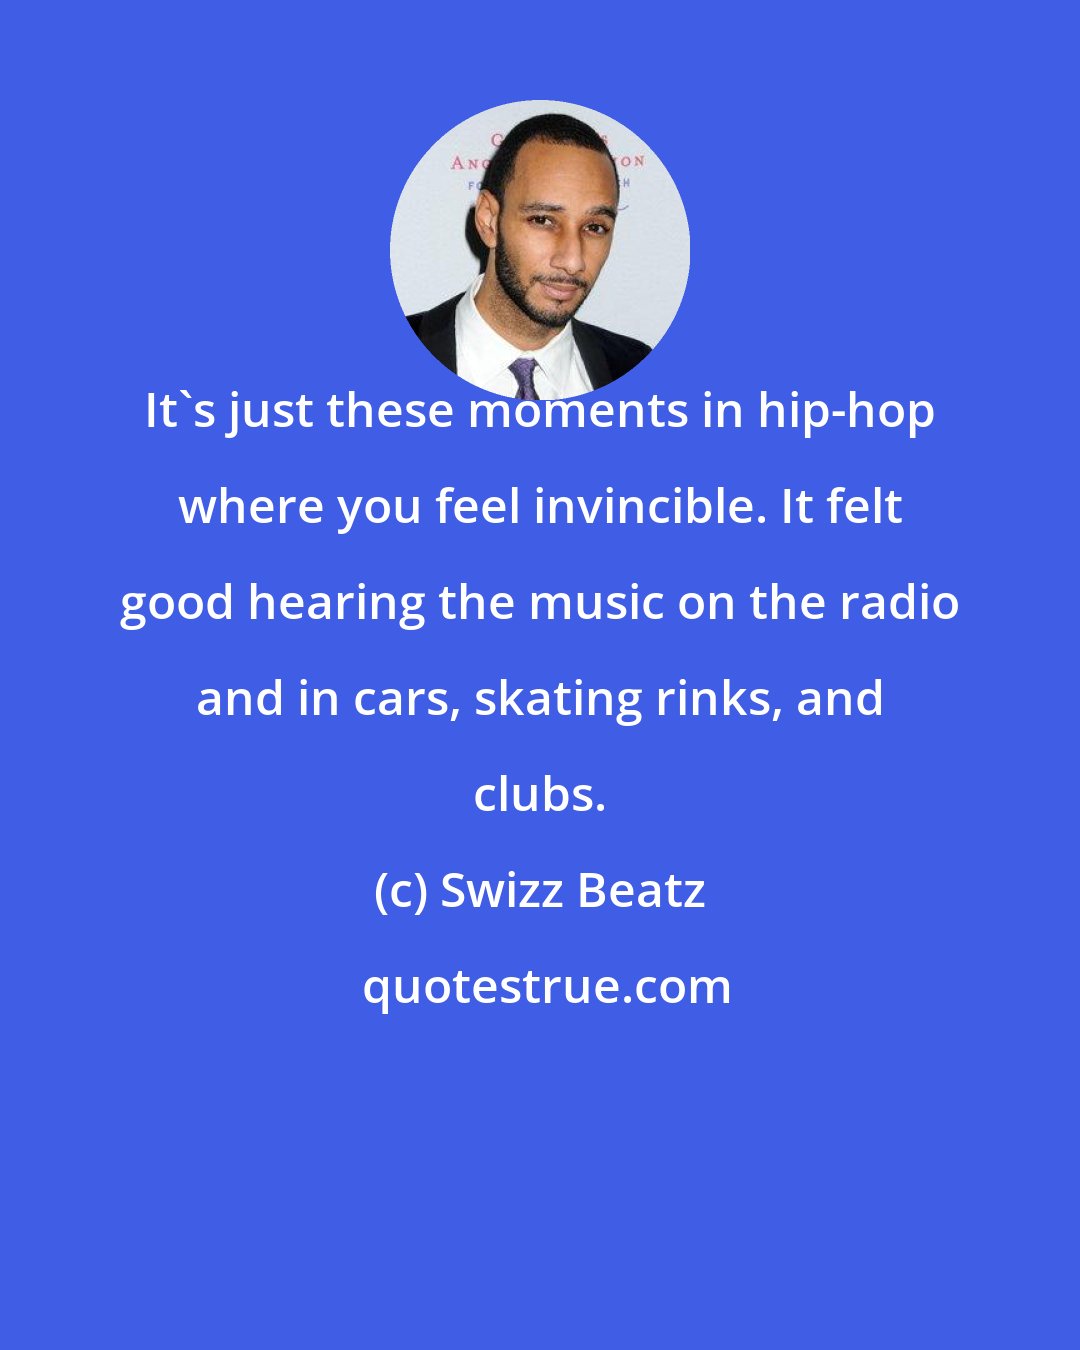 Swizz Beatz: It's just these moments in hip-hop where you feel invincible. It felt good hearing the music on the radio and in cars, skating rinks, and clubs.